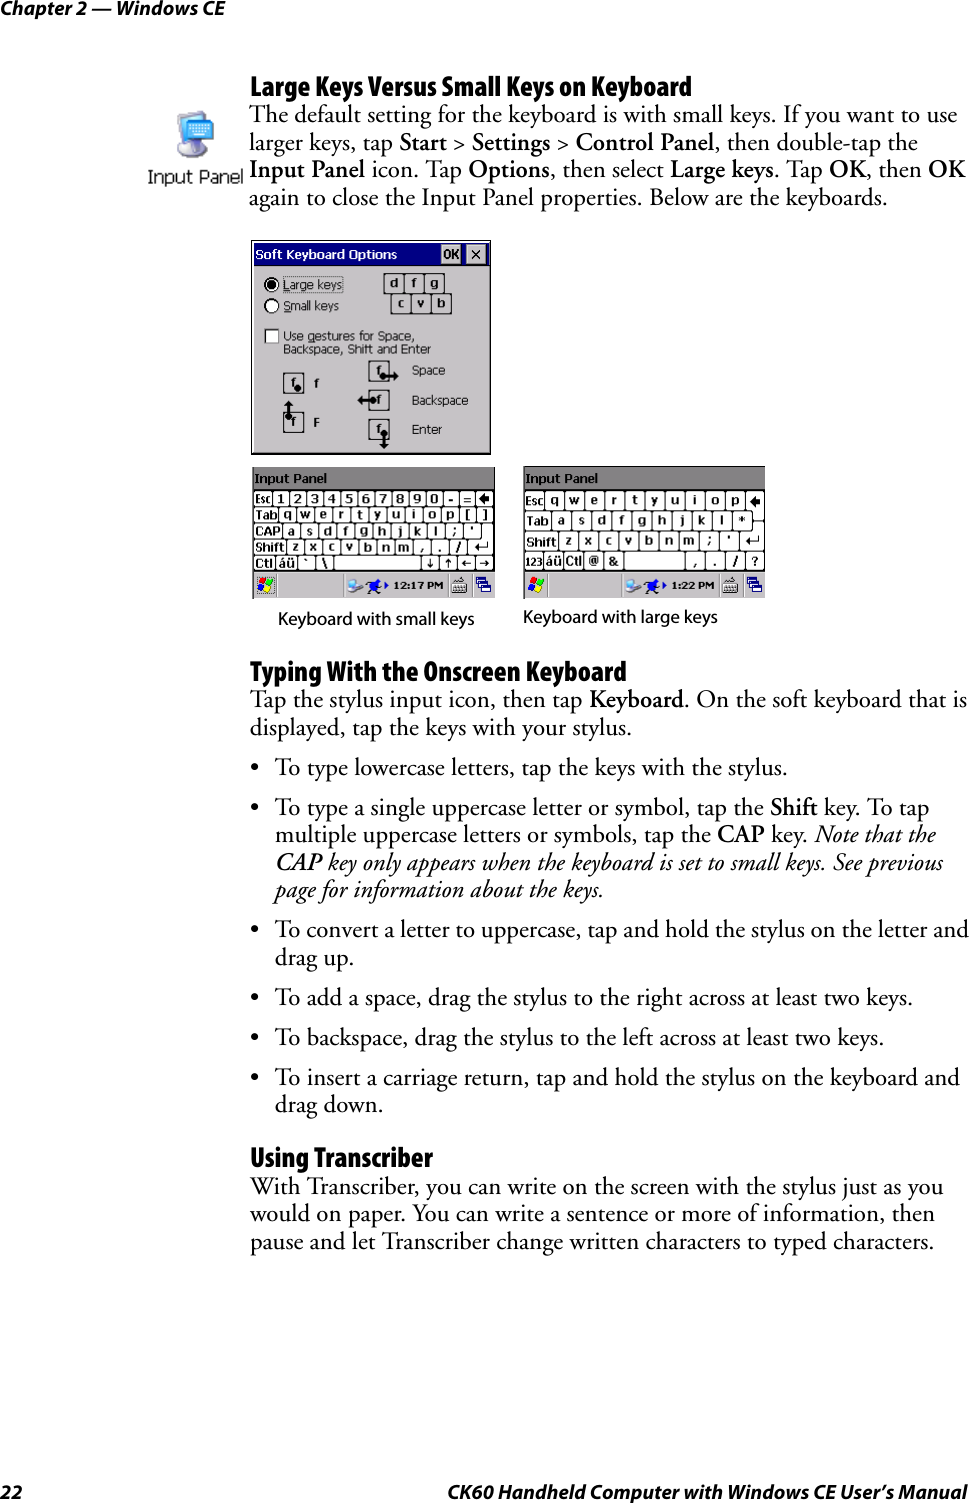 Chapter 2 — Windows CE22 CK60 Handheld Computer with Windows CE User’s ManualLarge Keys Versus Small Keys on KeyboardTyping With the Onscreen KeyboardTap the stylus input icon, then tap Keyboard. On the soft keyboard that is displayed, tap the keys with your stylus.• To type lowercase letters, tap the keys with the stylus.• To type a single uppercase letter or symbol, tap the Shift key. To tap multiple uppercase letters or symbols, tap the CAP key. Note that the CAP key only appears when the keyboard is set to small keys. See previous page for information about the keys.• To convert a letter to uppercase, tap and hold the stylus on the letter and drag up.• To add a space, drag the stylus to the right across at least two keys.• To backspace, drag the stylus to the left across at least two keys.• To insert a carriage return, tap and hold the stylus on the keyboard and drag down.Using TranscriberWith Transcriber, you can write on the screen with the stylus just as you would on paper. You can write a sentence or more of information, then pause and let Transcriber change written characters to typed characters.The default setting for the keyboard is with small keys. If you want to use larger keys, tap Start &gt; Settings &gt; Control Panel, then double-tap the Input Panel icon. Tap Options, then select Large keys. Tap OK, then OK again to close the Input Panel properties. Below are the keyboards.Keyboard with small keys Keyboard with large keys